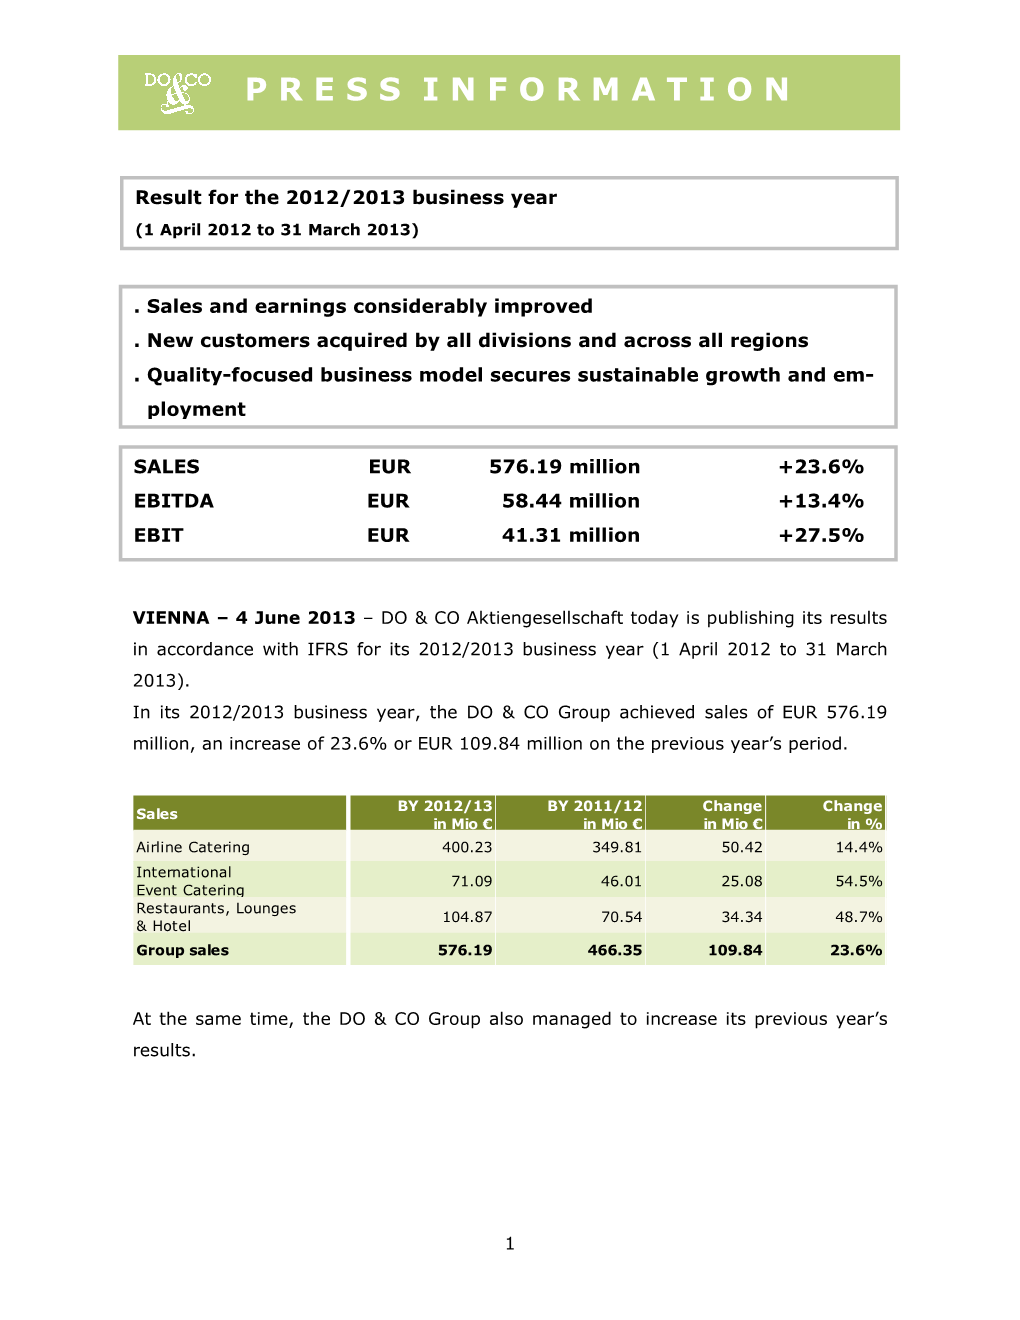 Financial Results of the Business Year 2012/2013